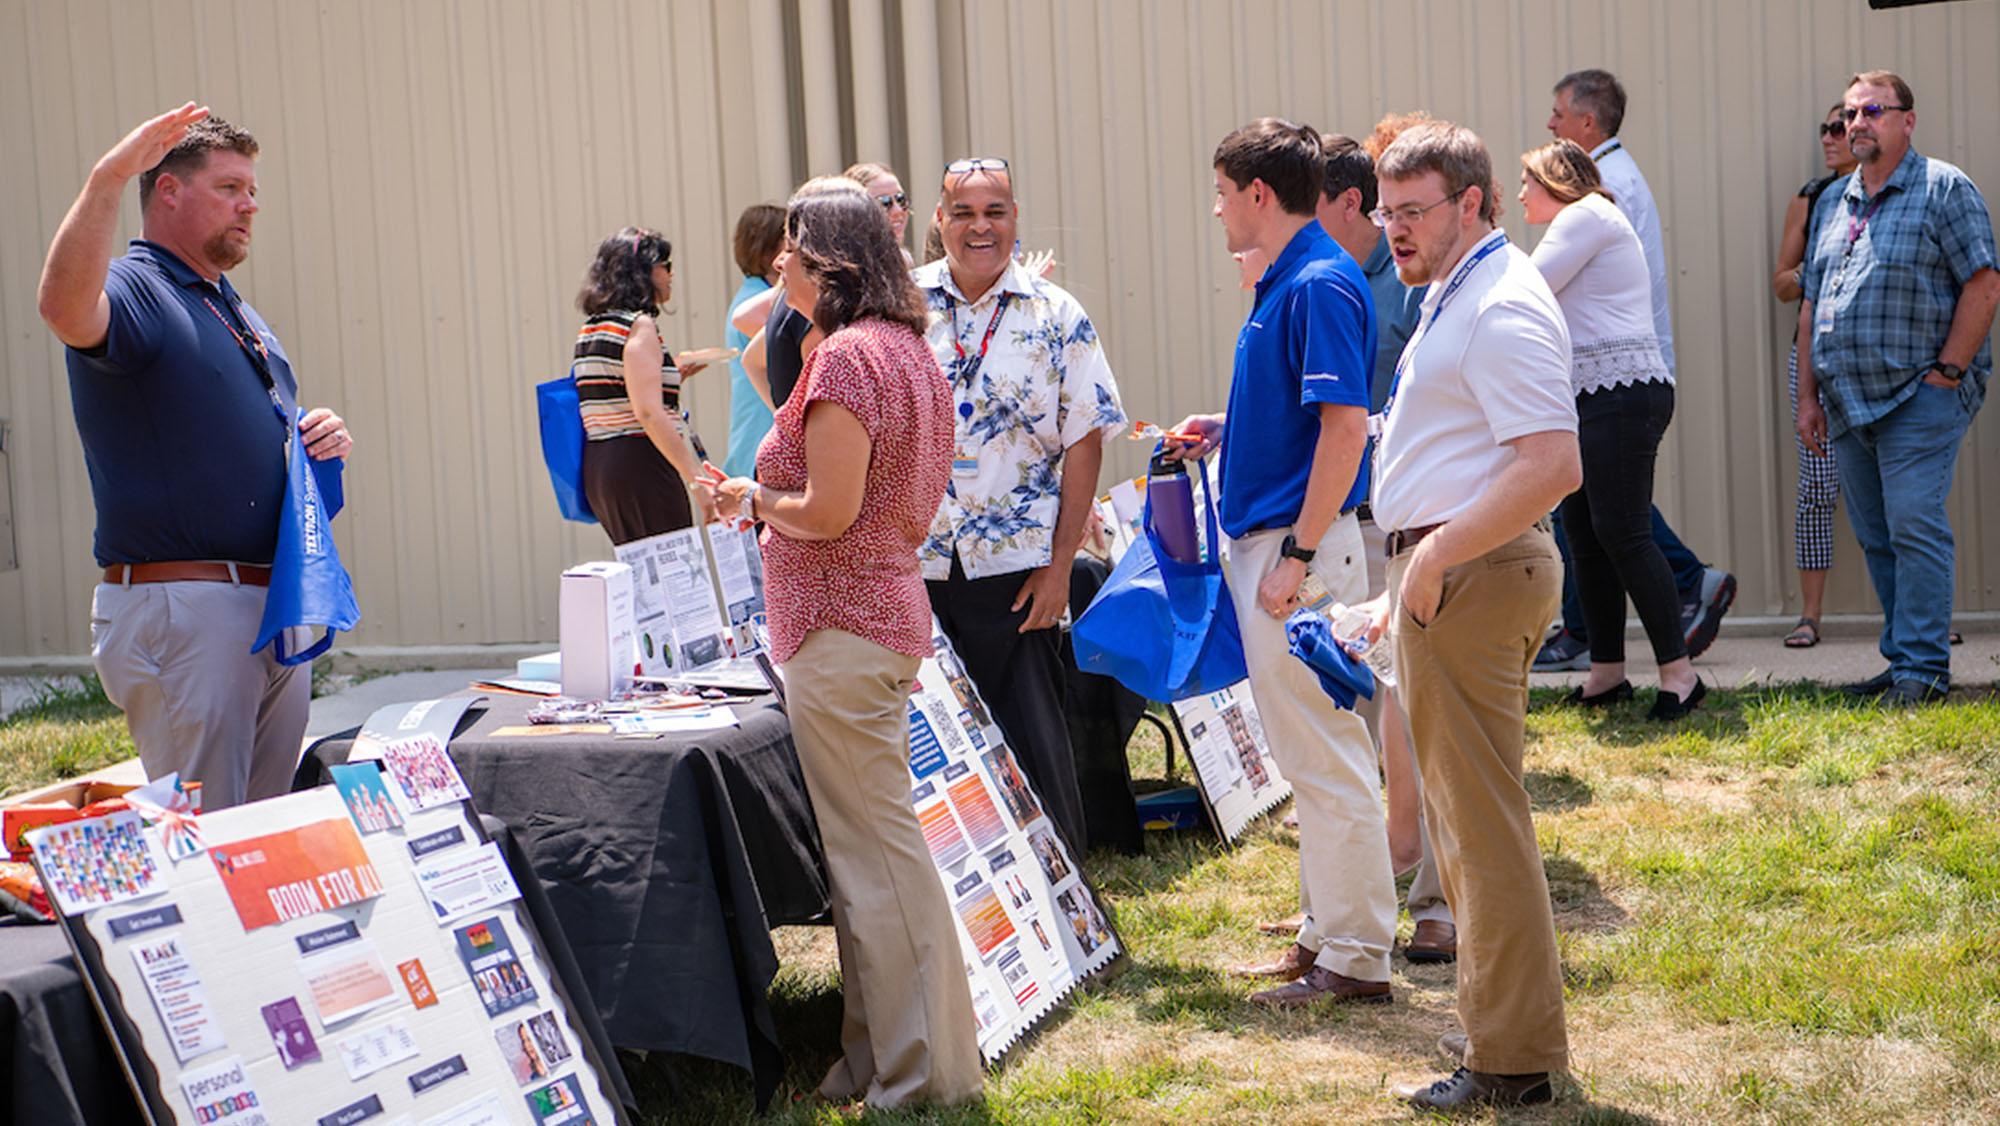 Textron Systems' employees in the courtyard